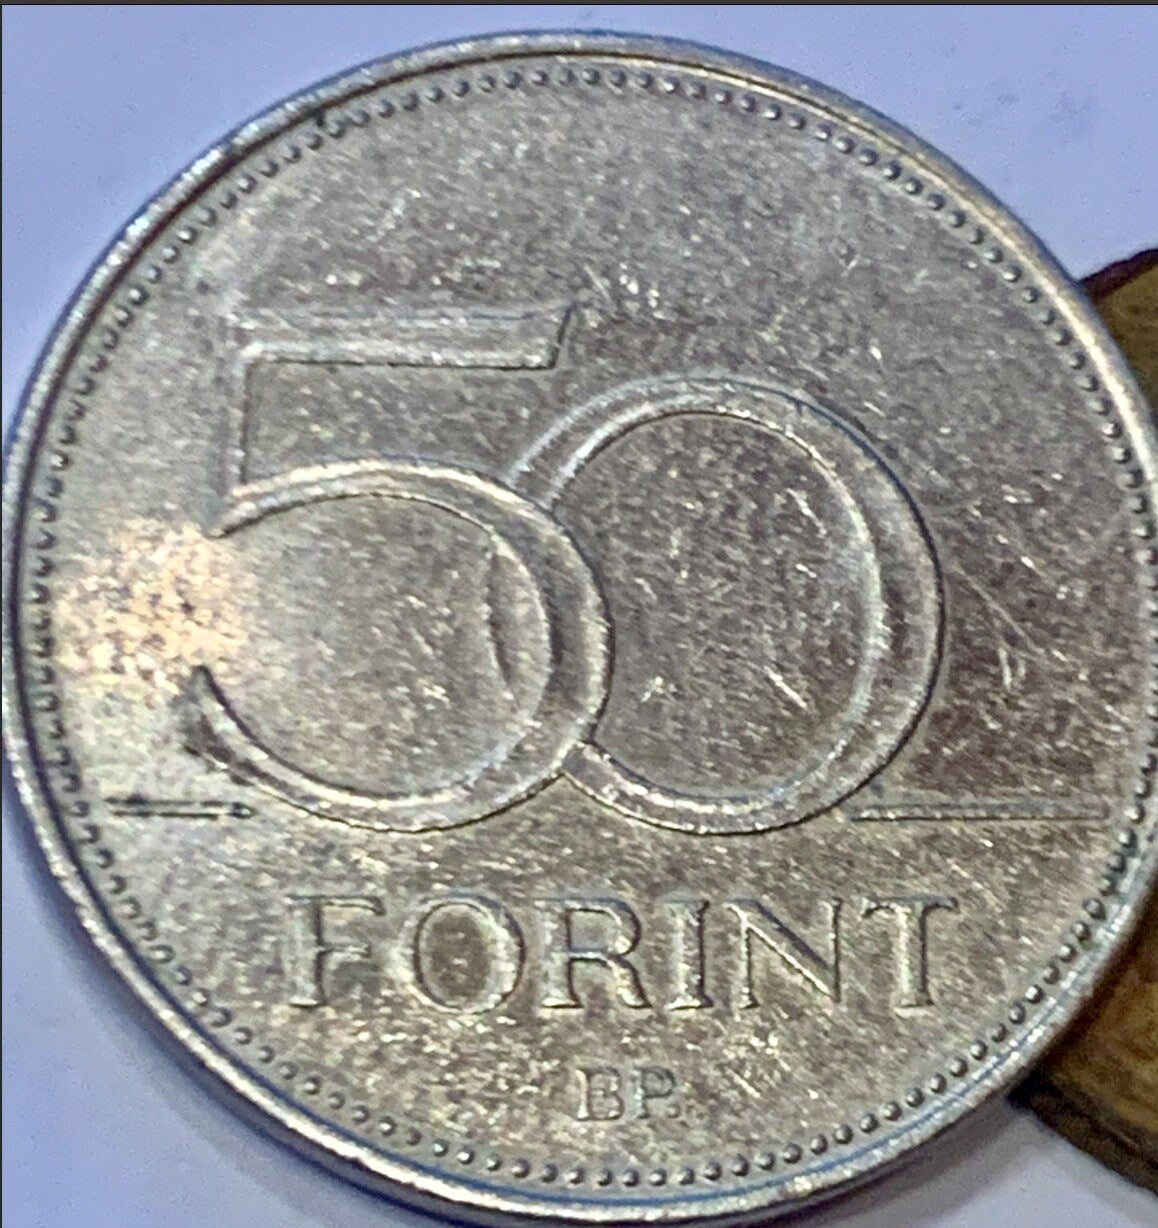 Hungary 50 Forint 2000-BP Commemorative Coin